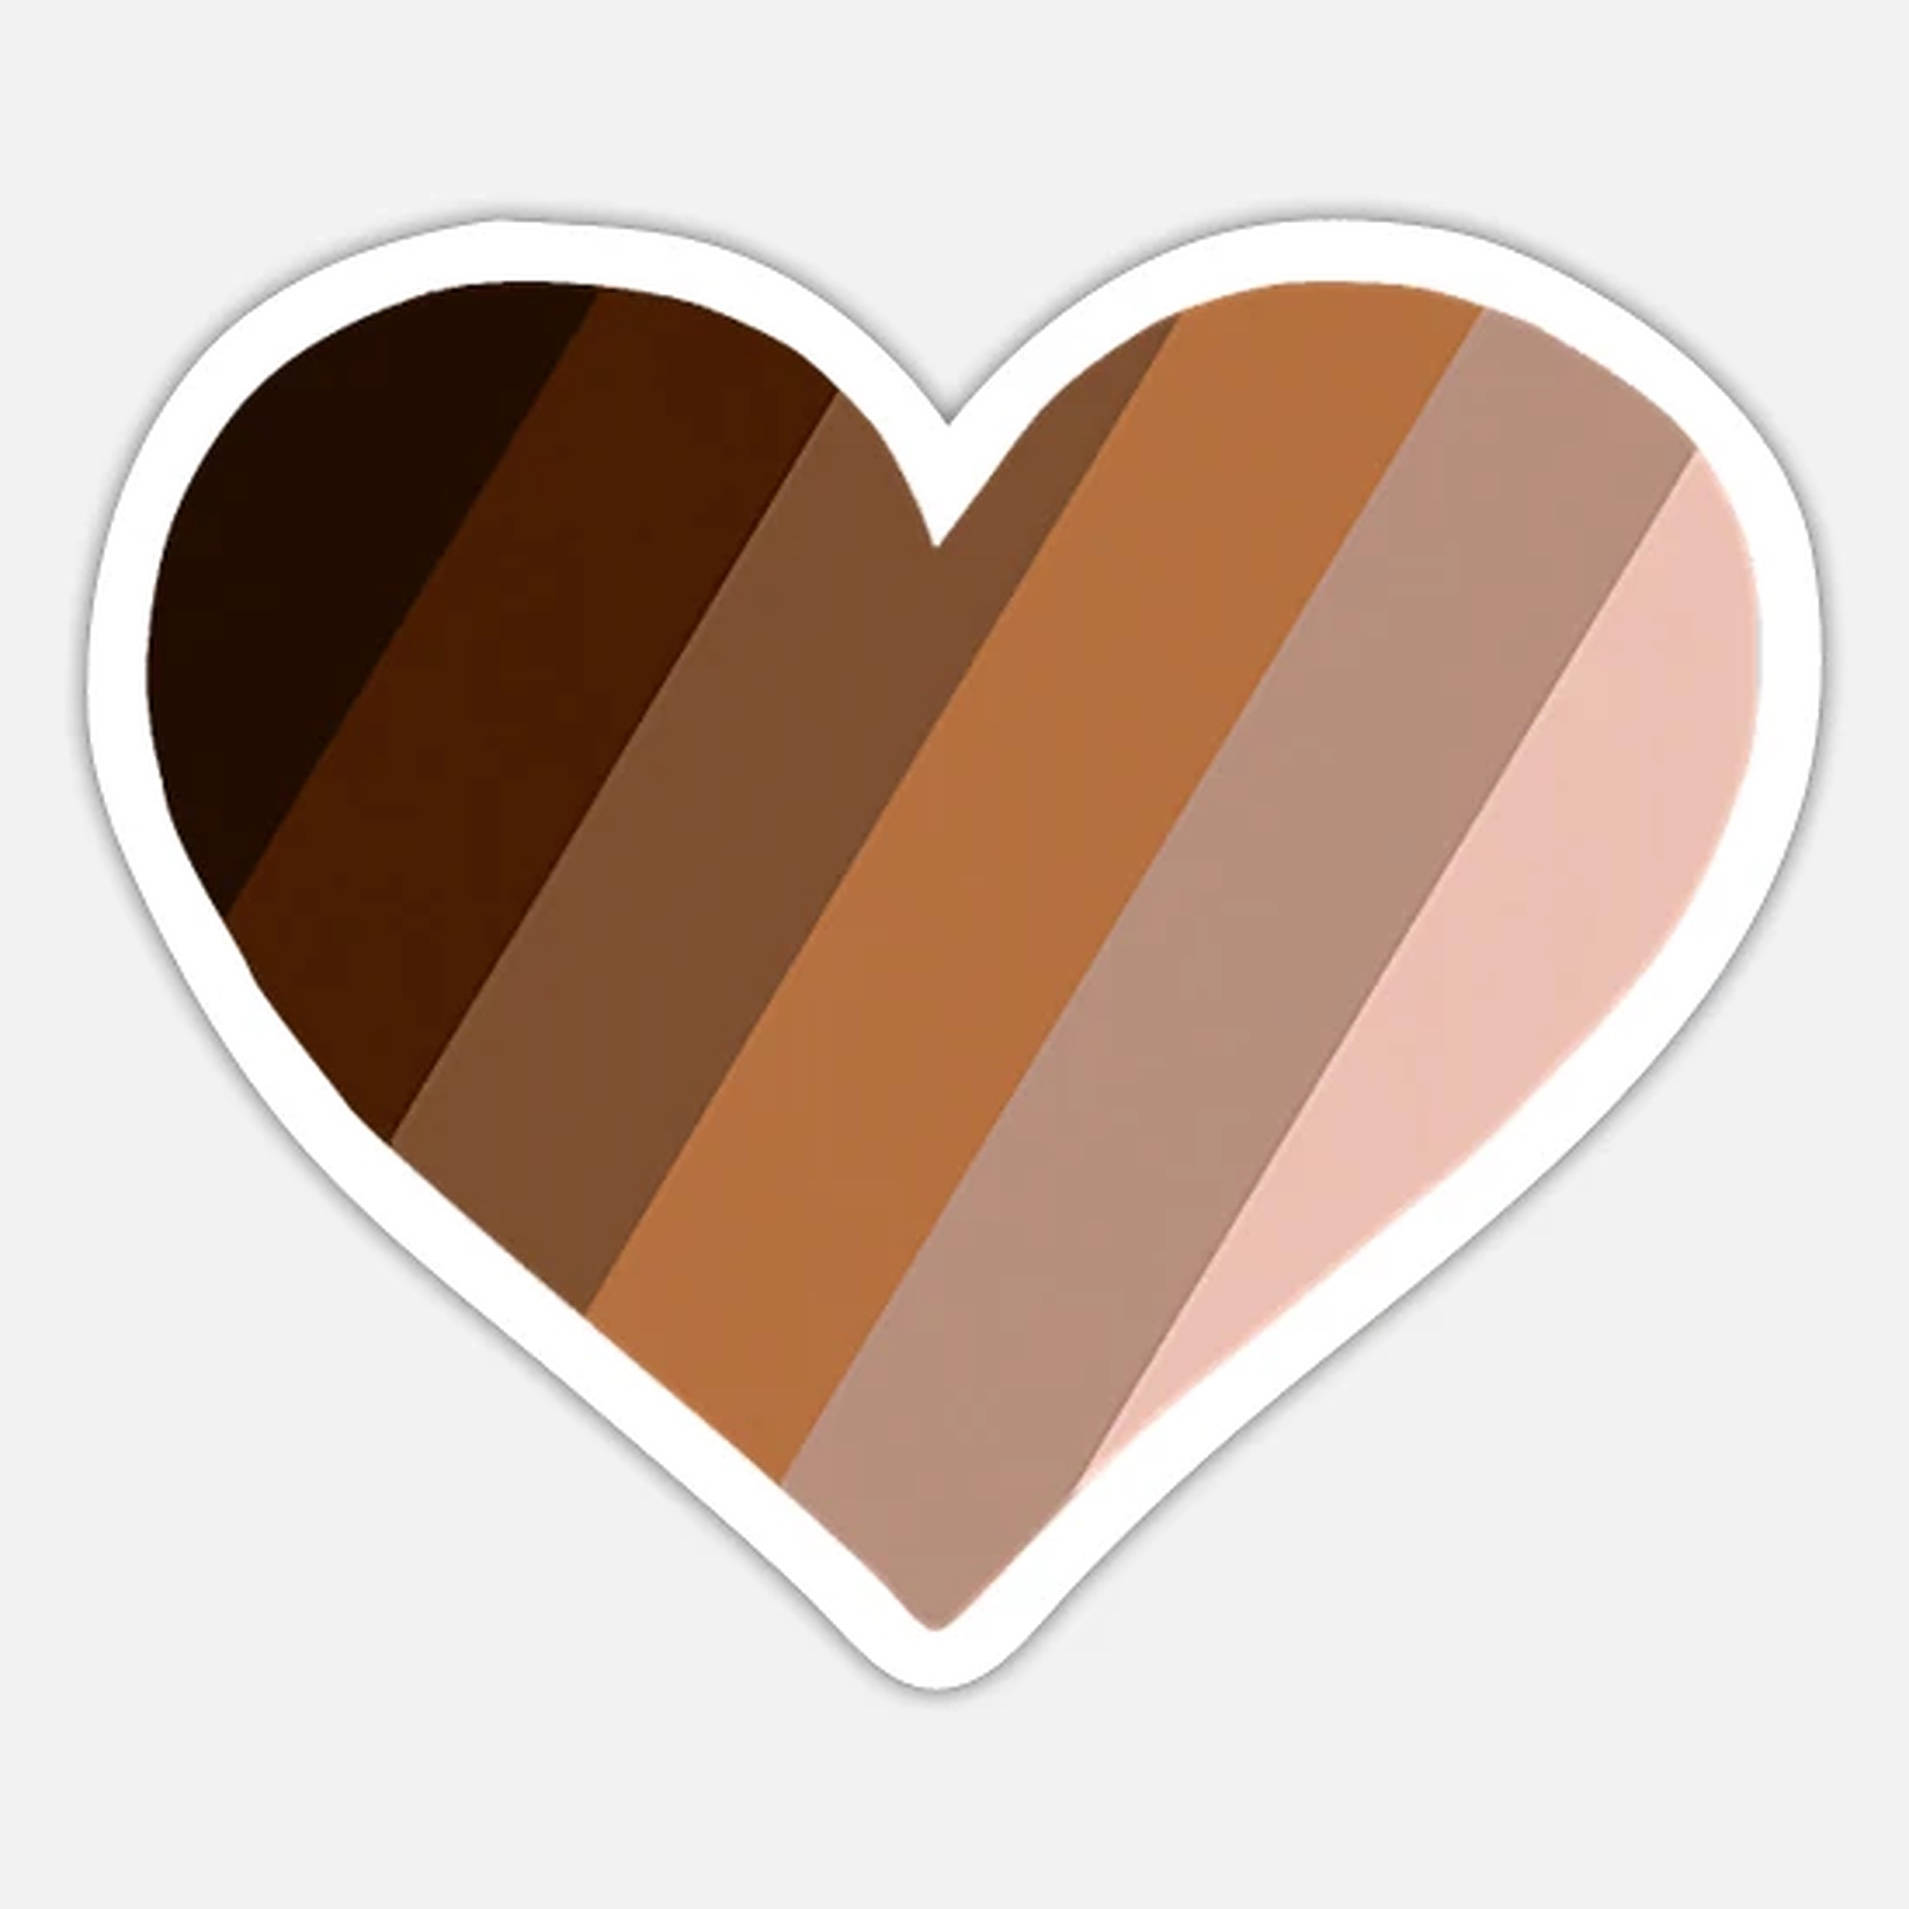 Caption: Exquisite Striped Brown Heart Background